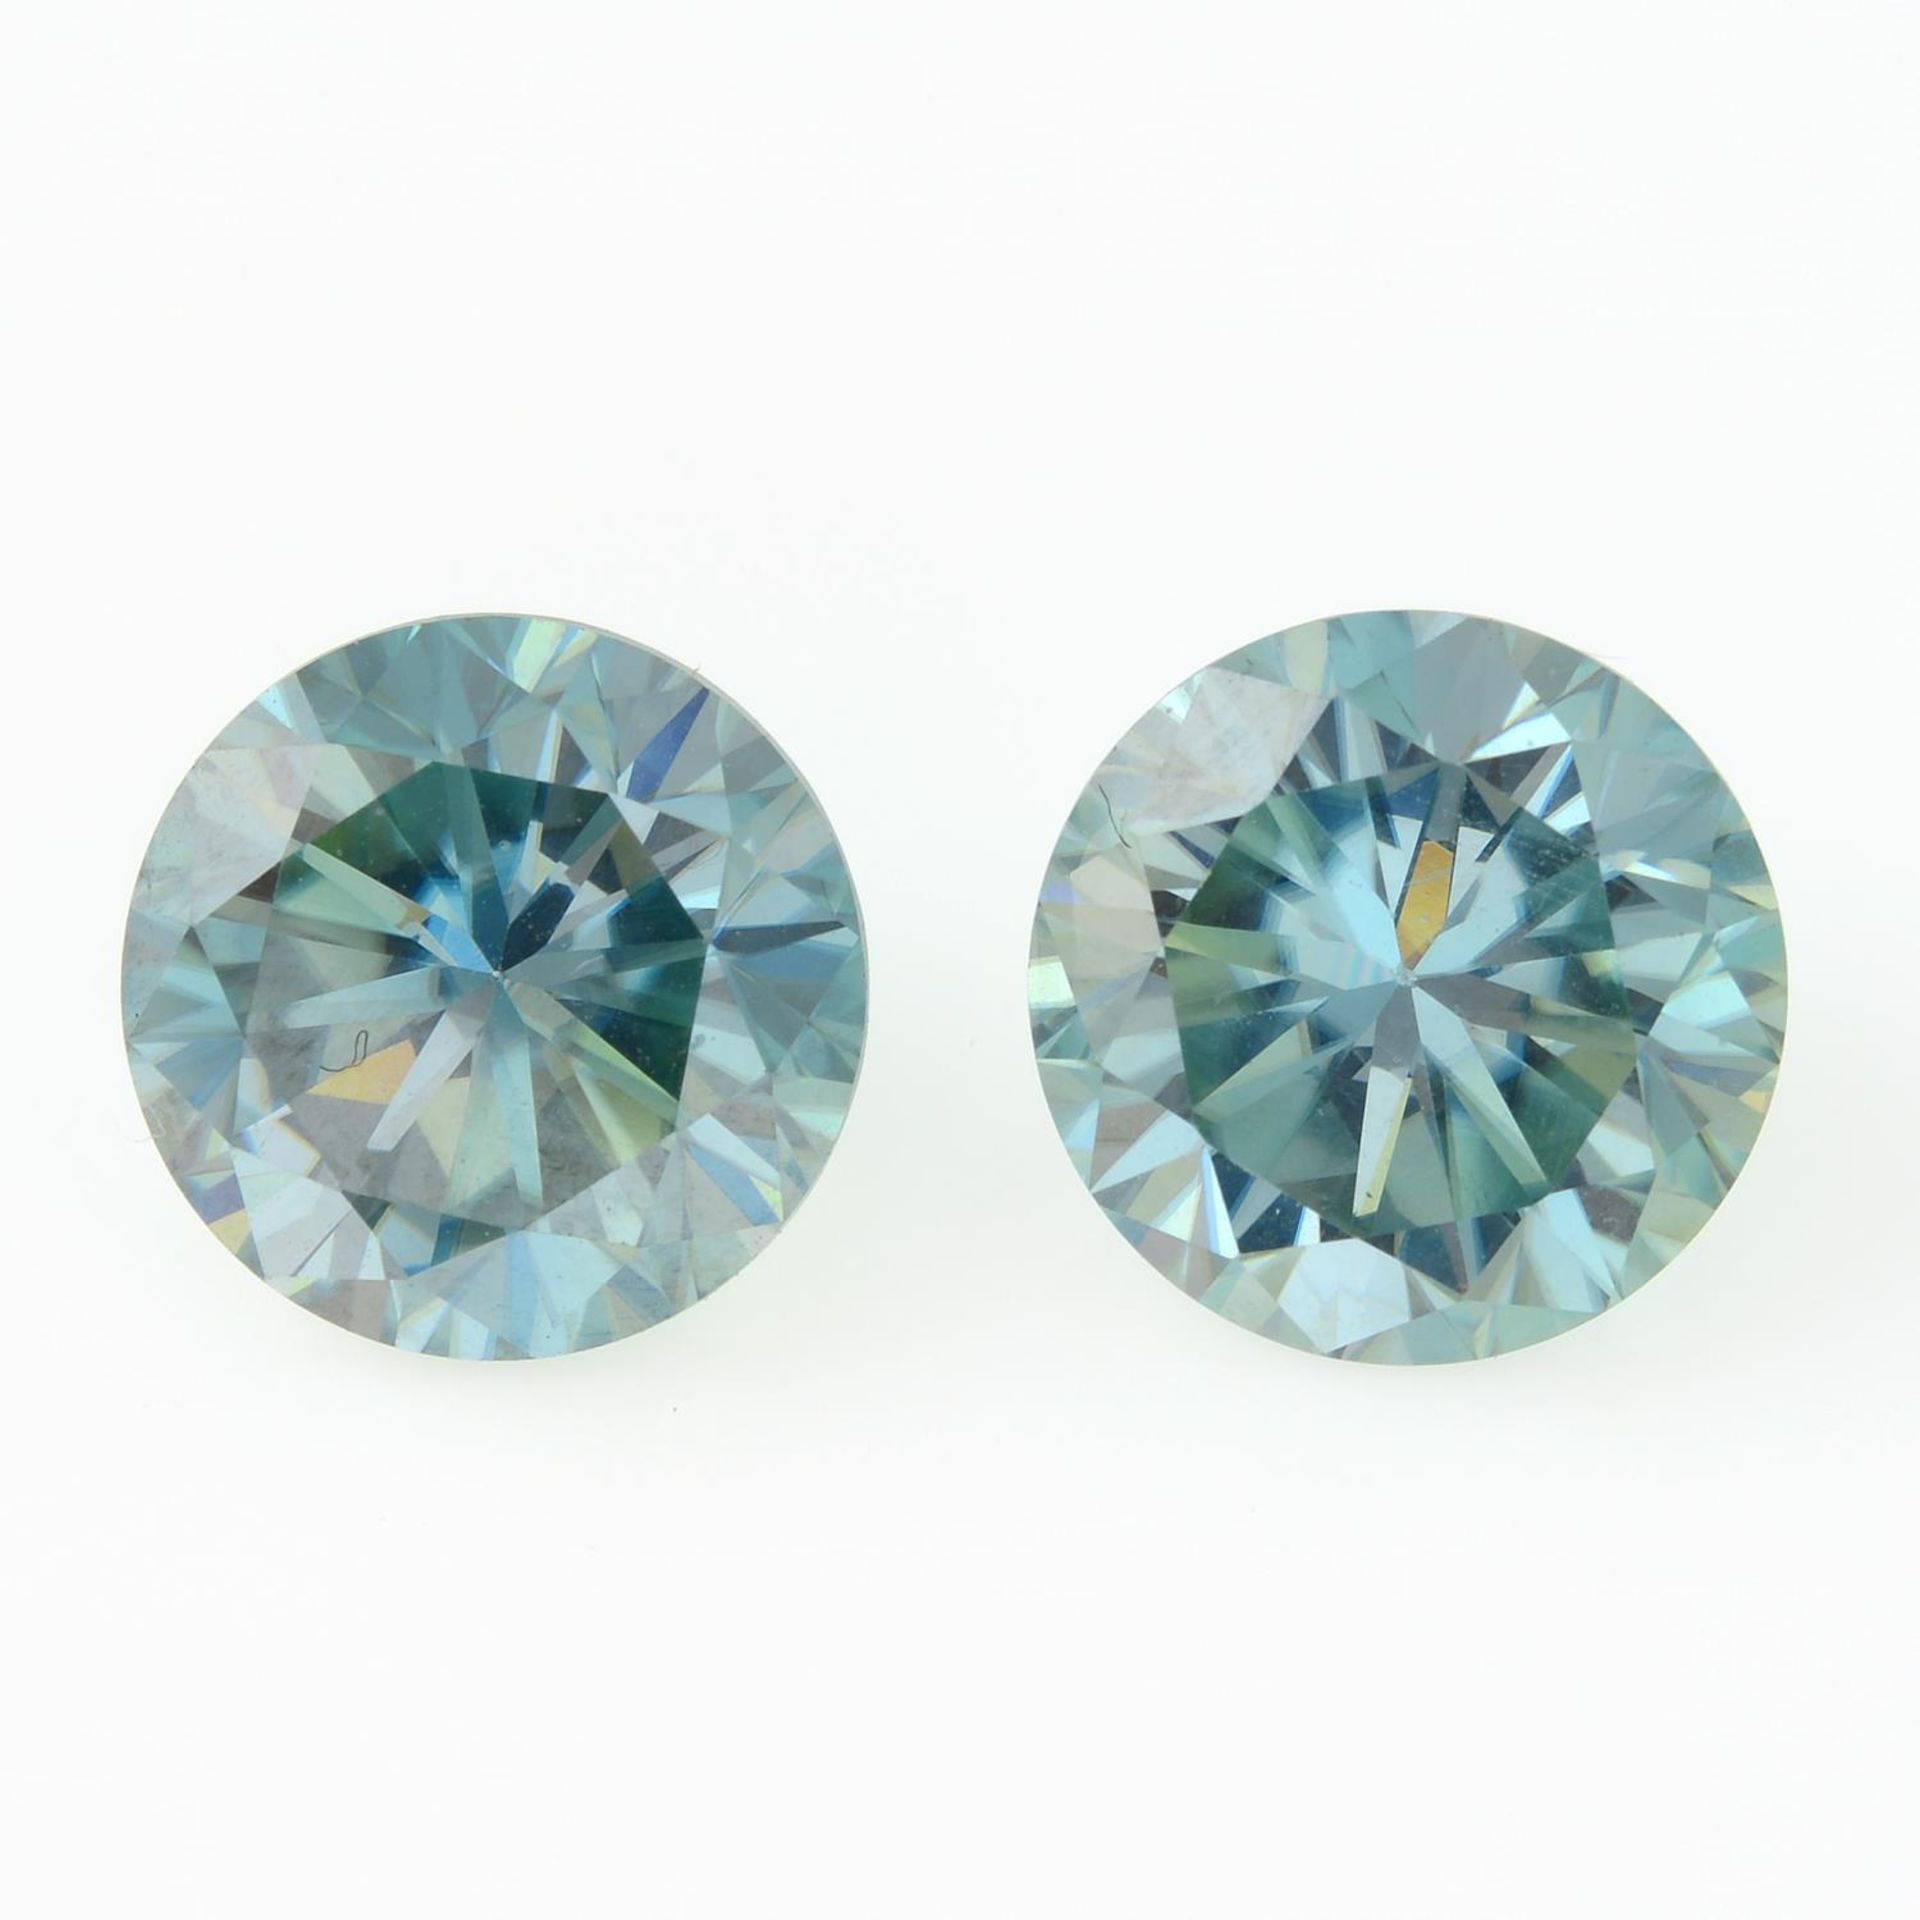 A pair of circular-shape green synthetic moissanites.